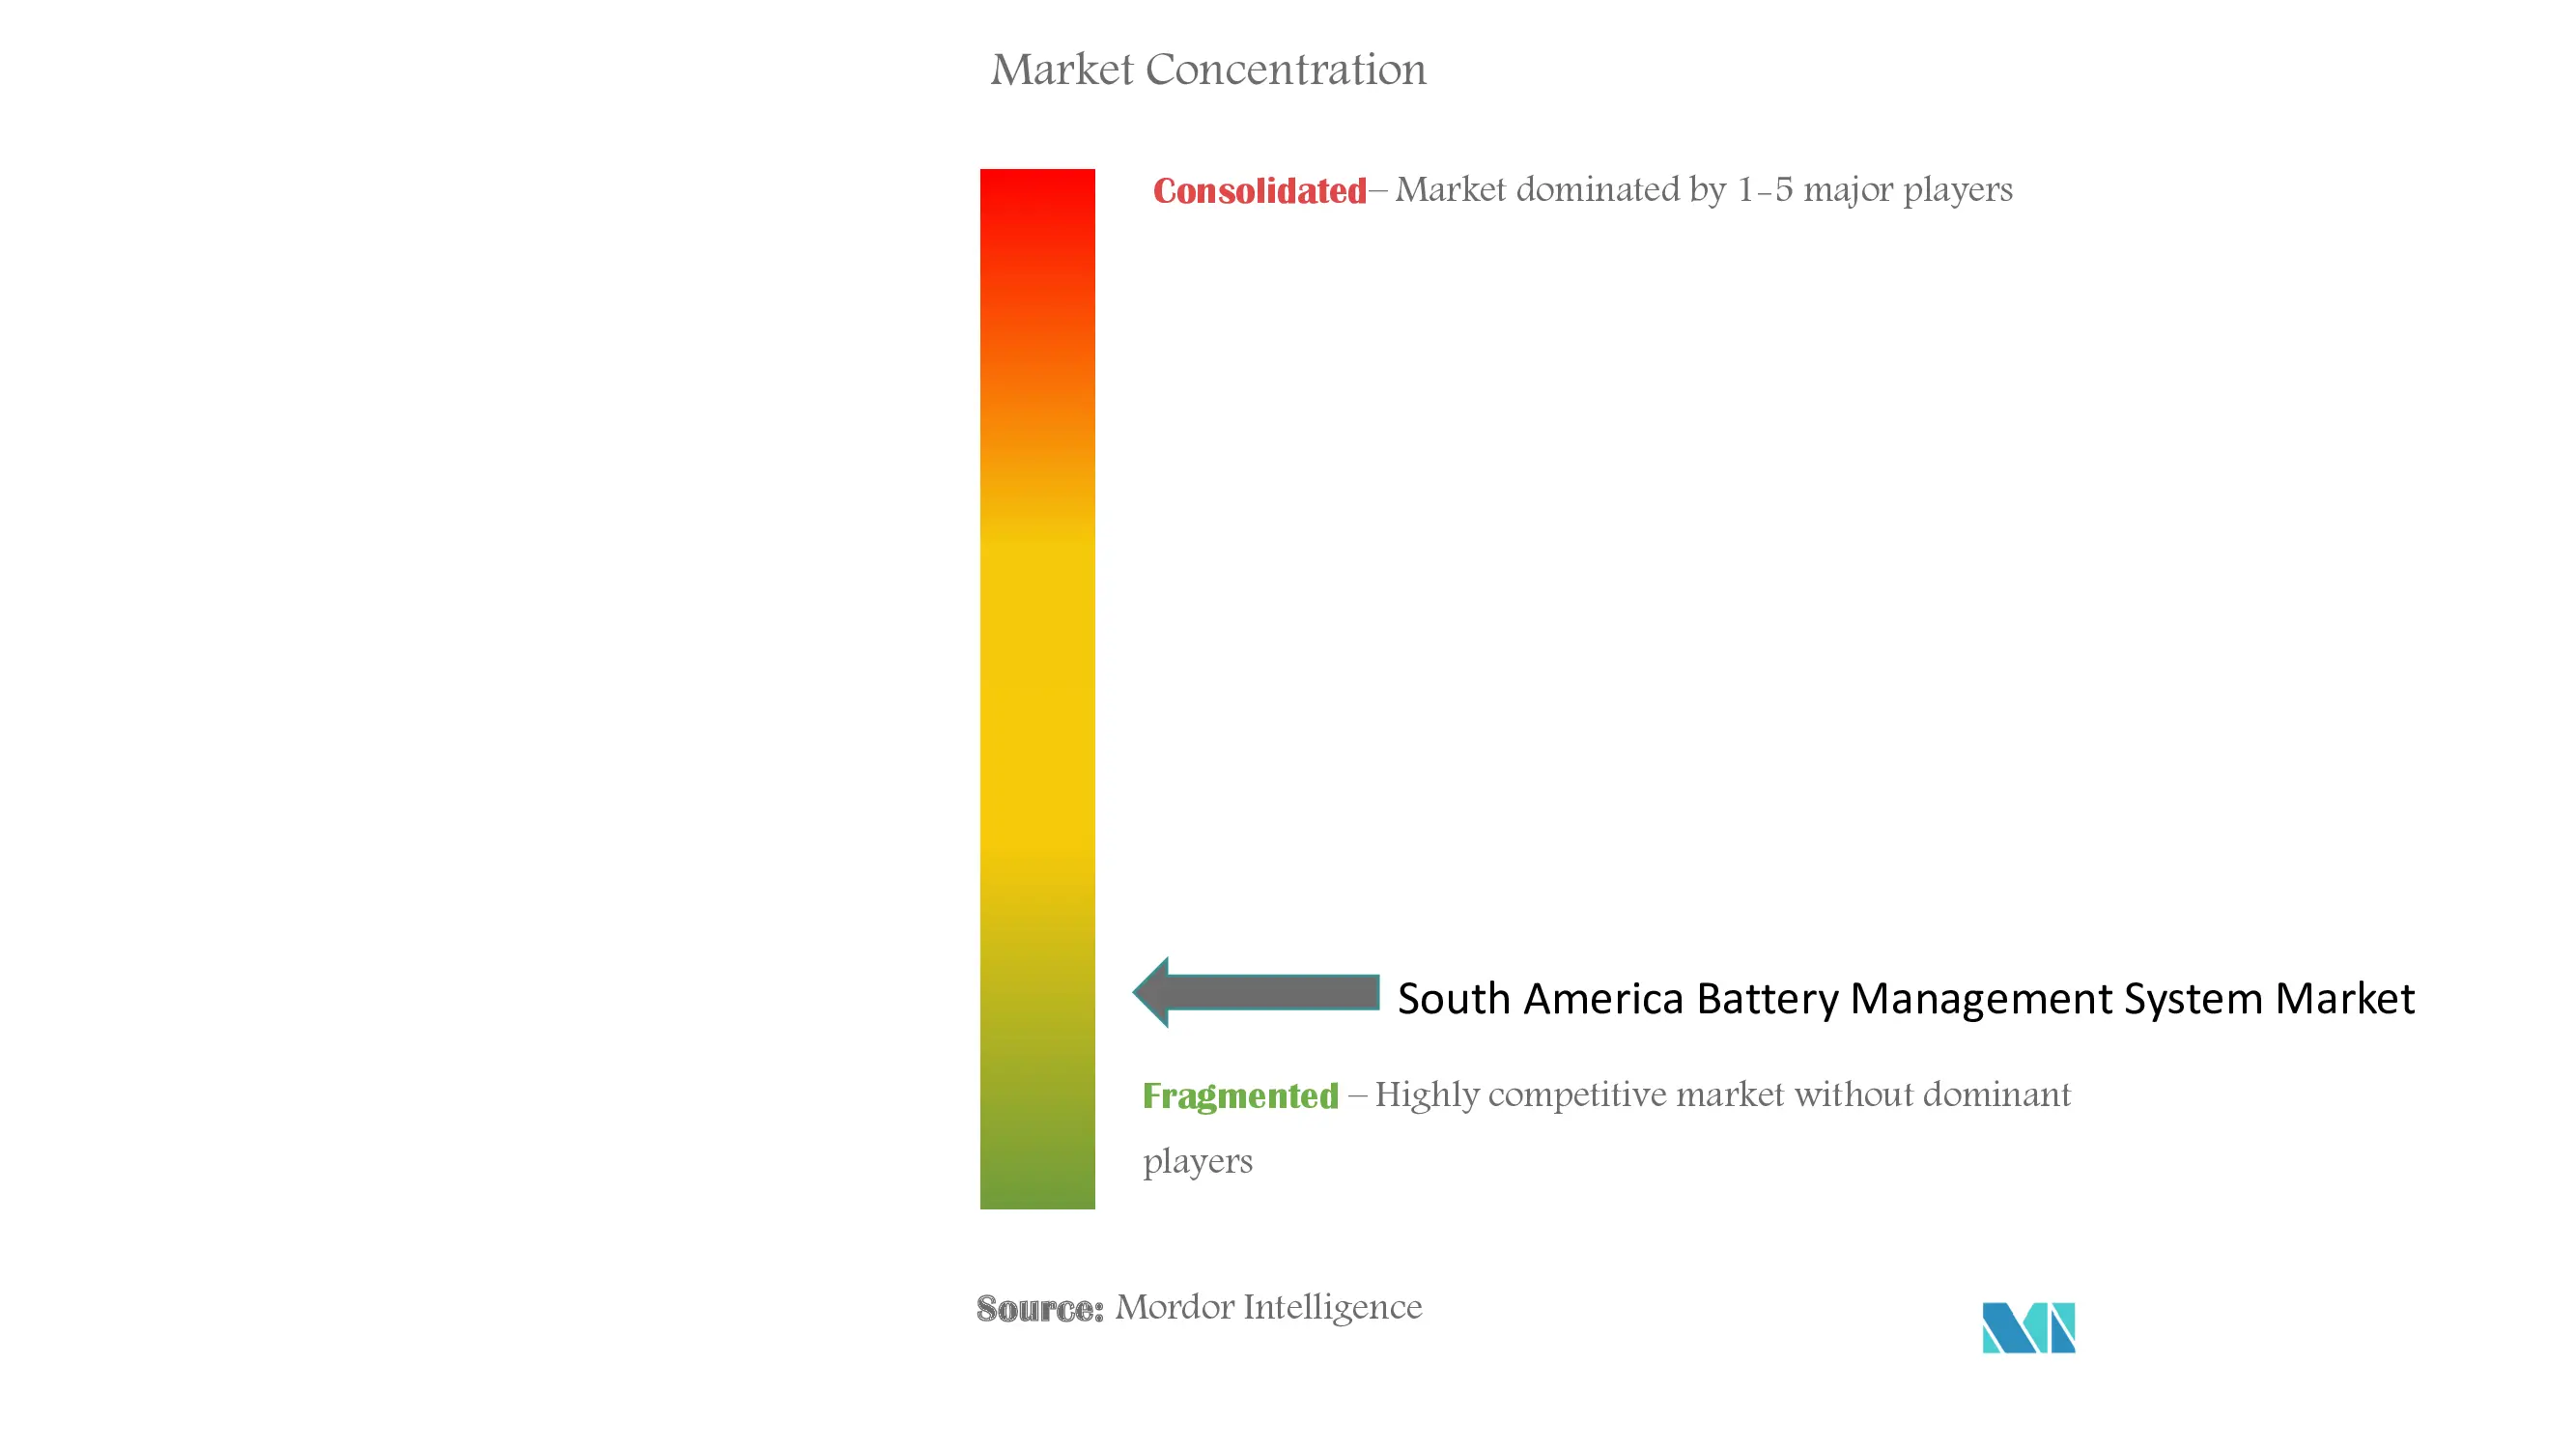 South America Battery Management System Market Concentration